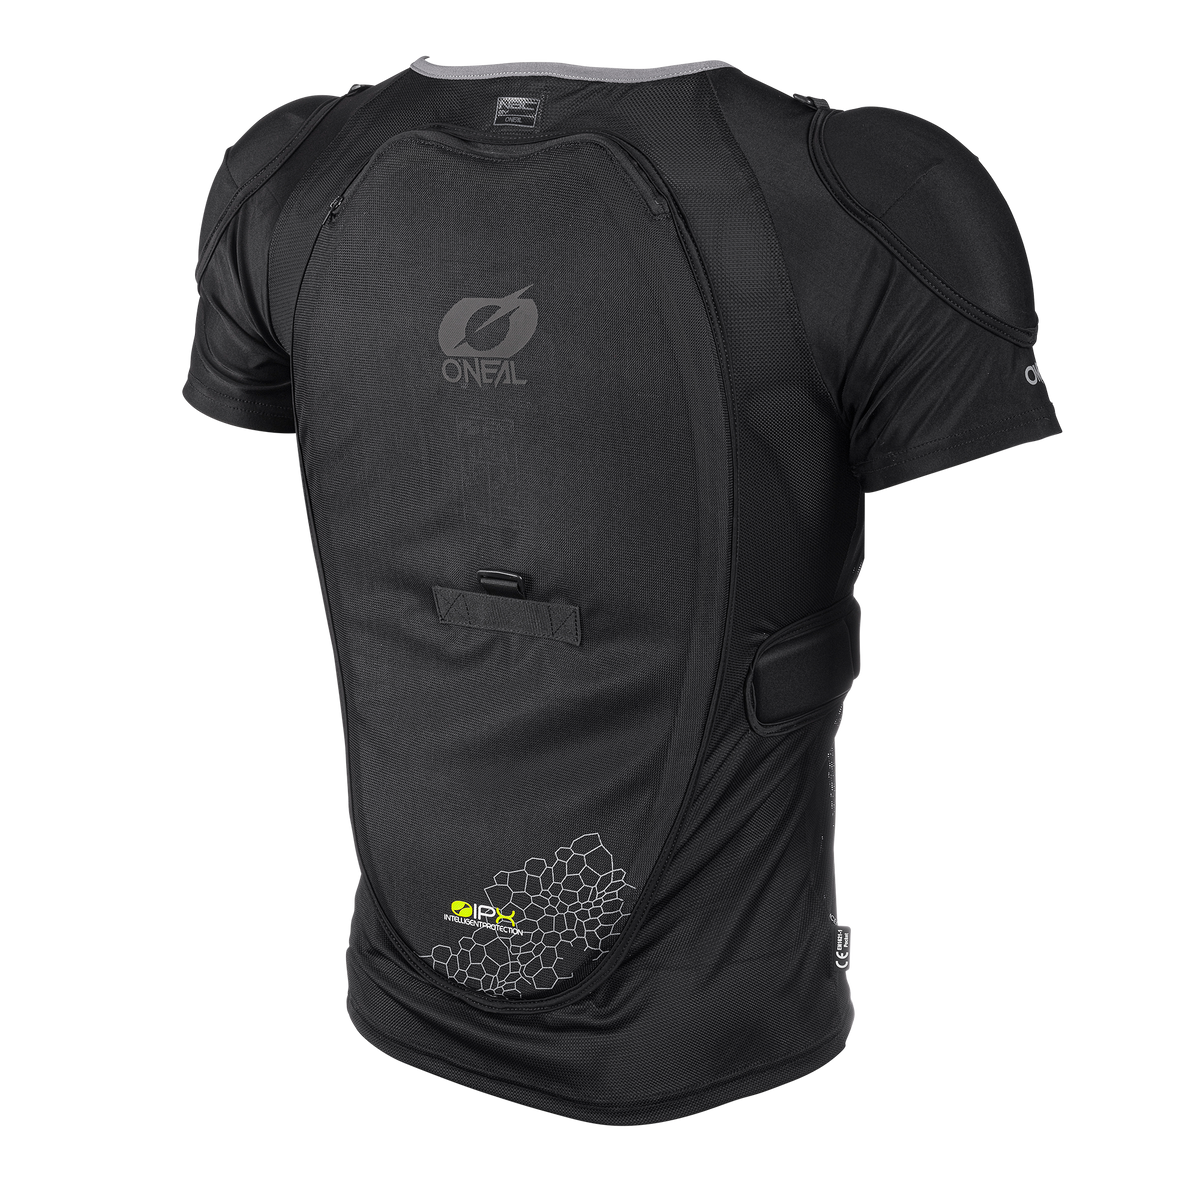 https://cdn.oneal.eu/assets/importedProductImages/PROTECTION/BODY%20ARMOUR/BP%20FAMILY/SLEEVE/black/2021_ONeal_BP_Protector_SLEEVE_black_back.png